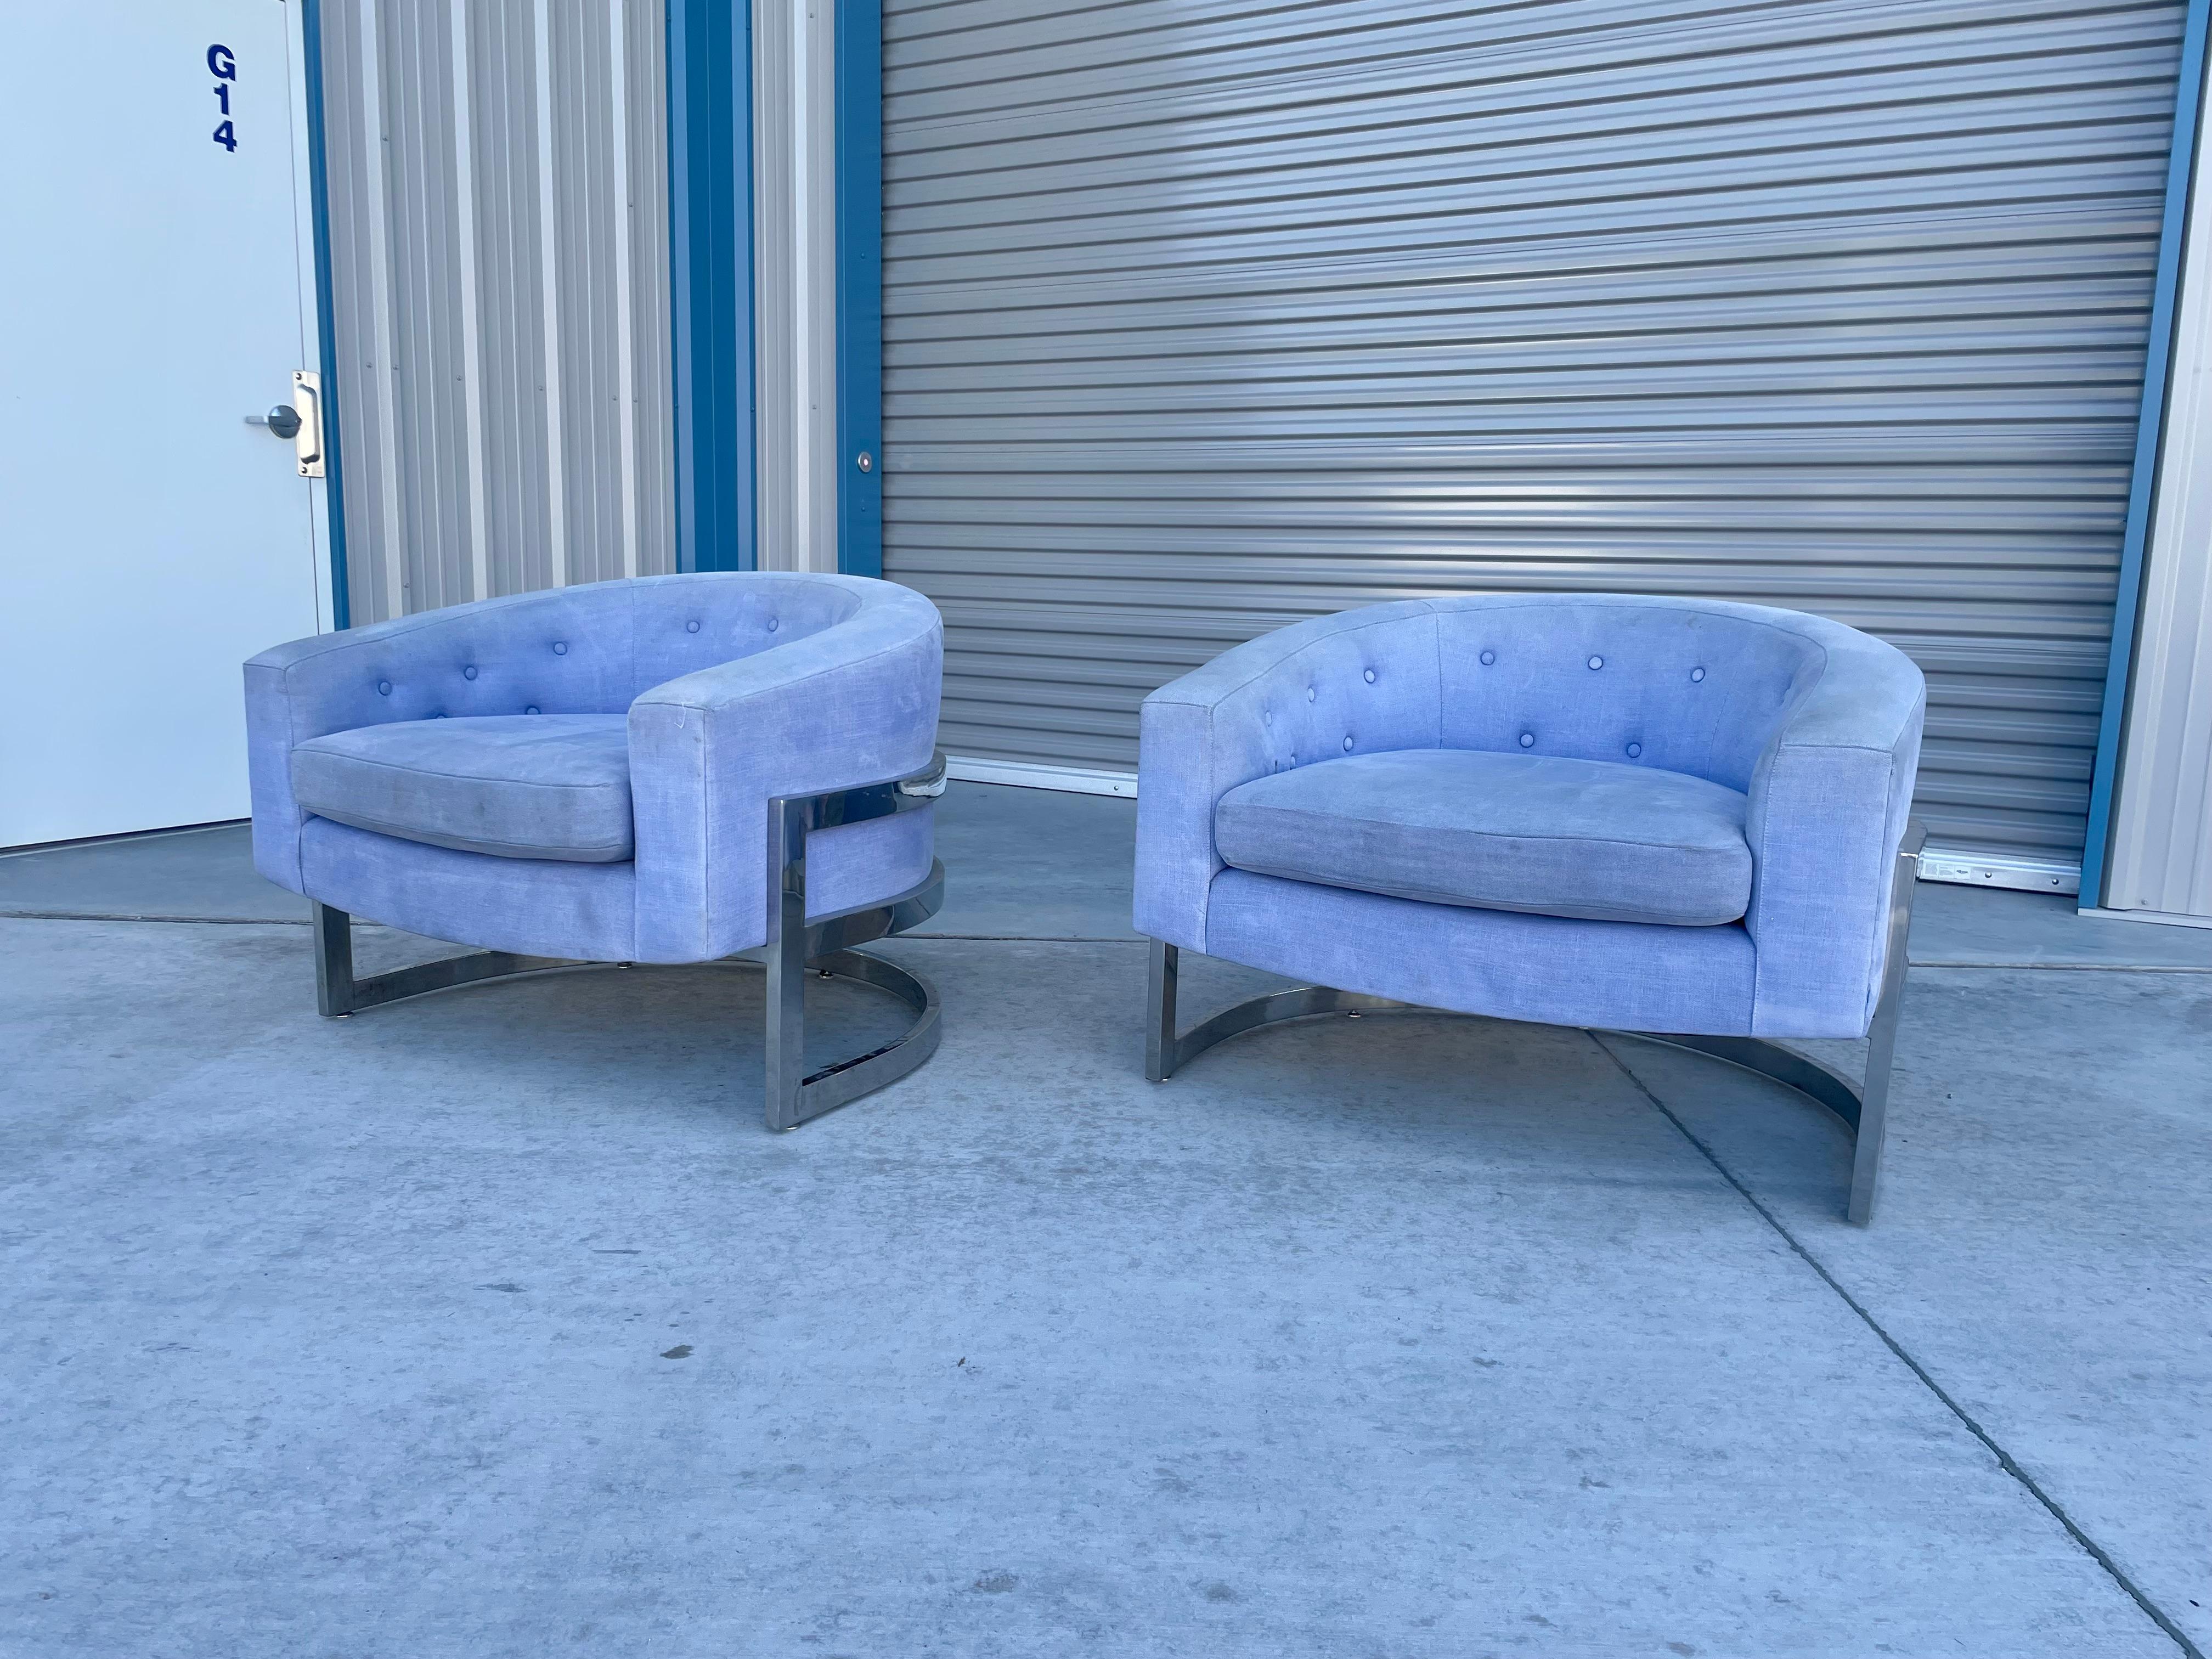 Mid-century barrel chairs were designed and manufactured in the United States circa 1970s. These beautiful pair of lounge chairs feature a barrel shape design on top of a chrome base wrapped around the seat, giving you the illusion that you're